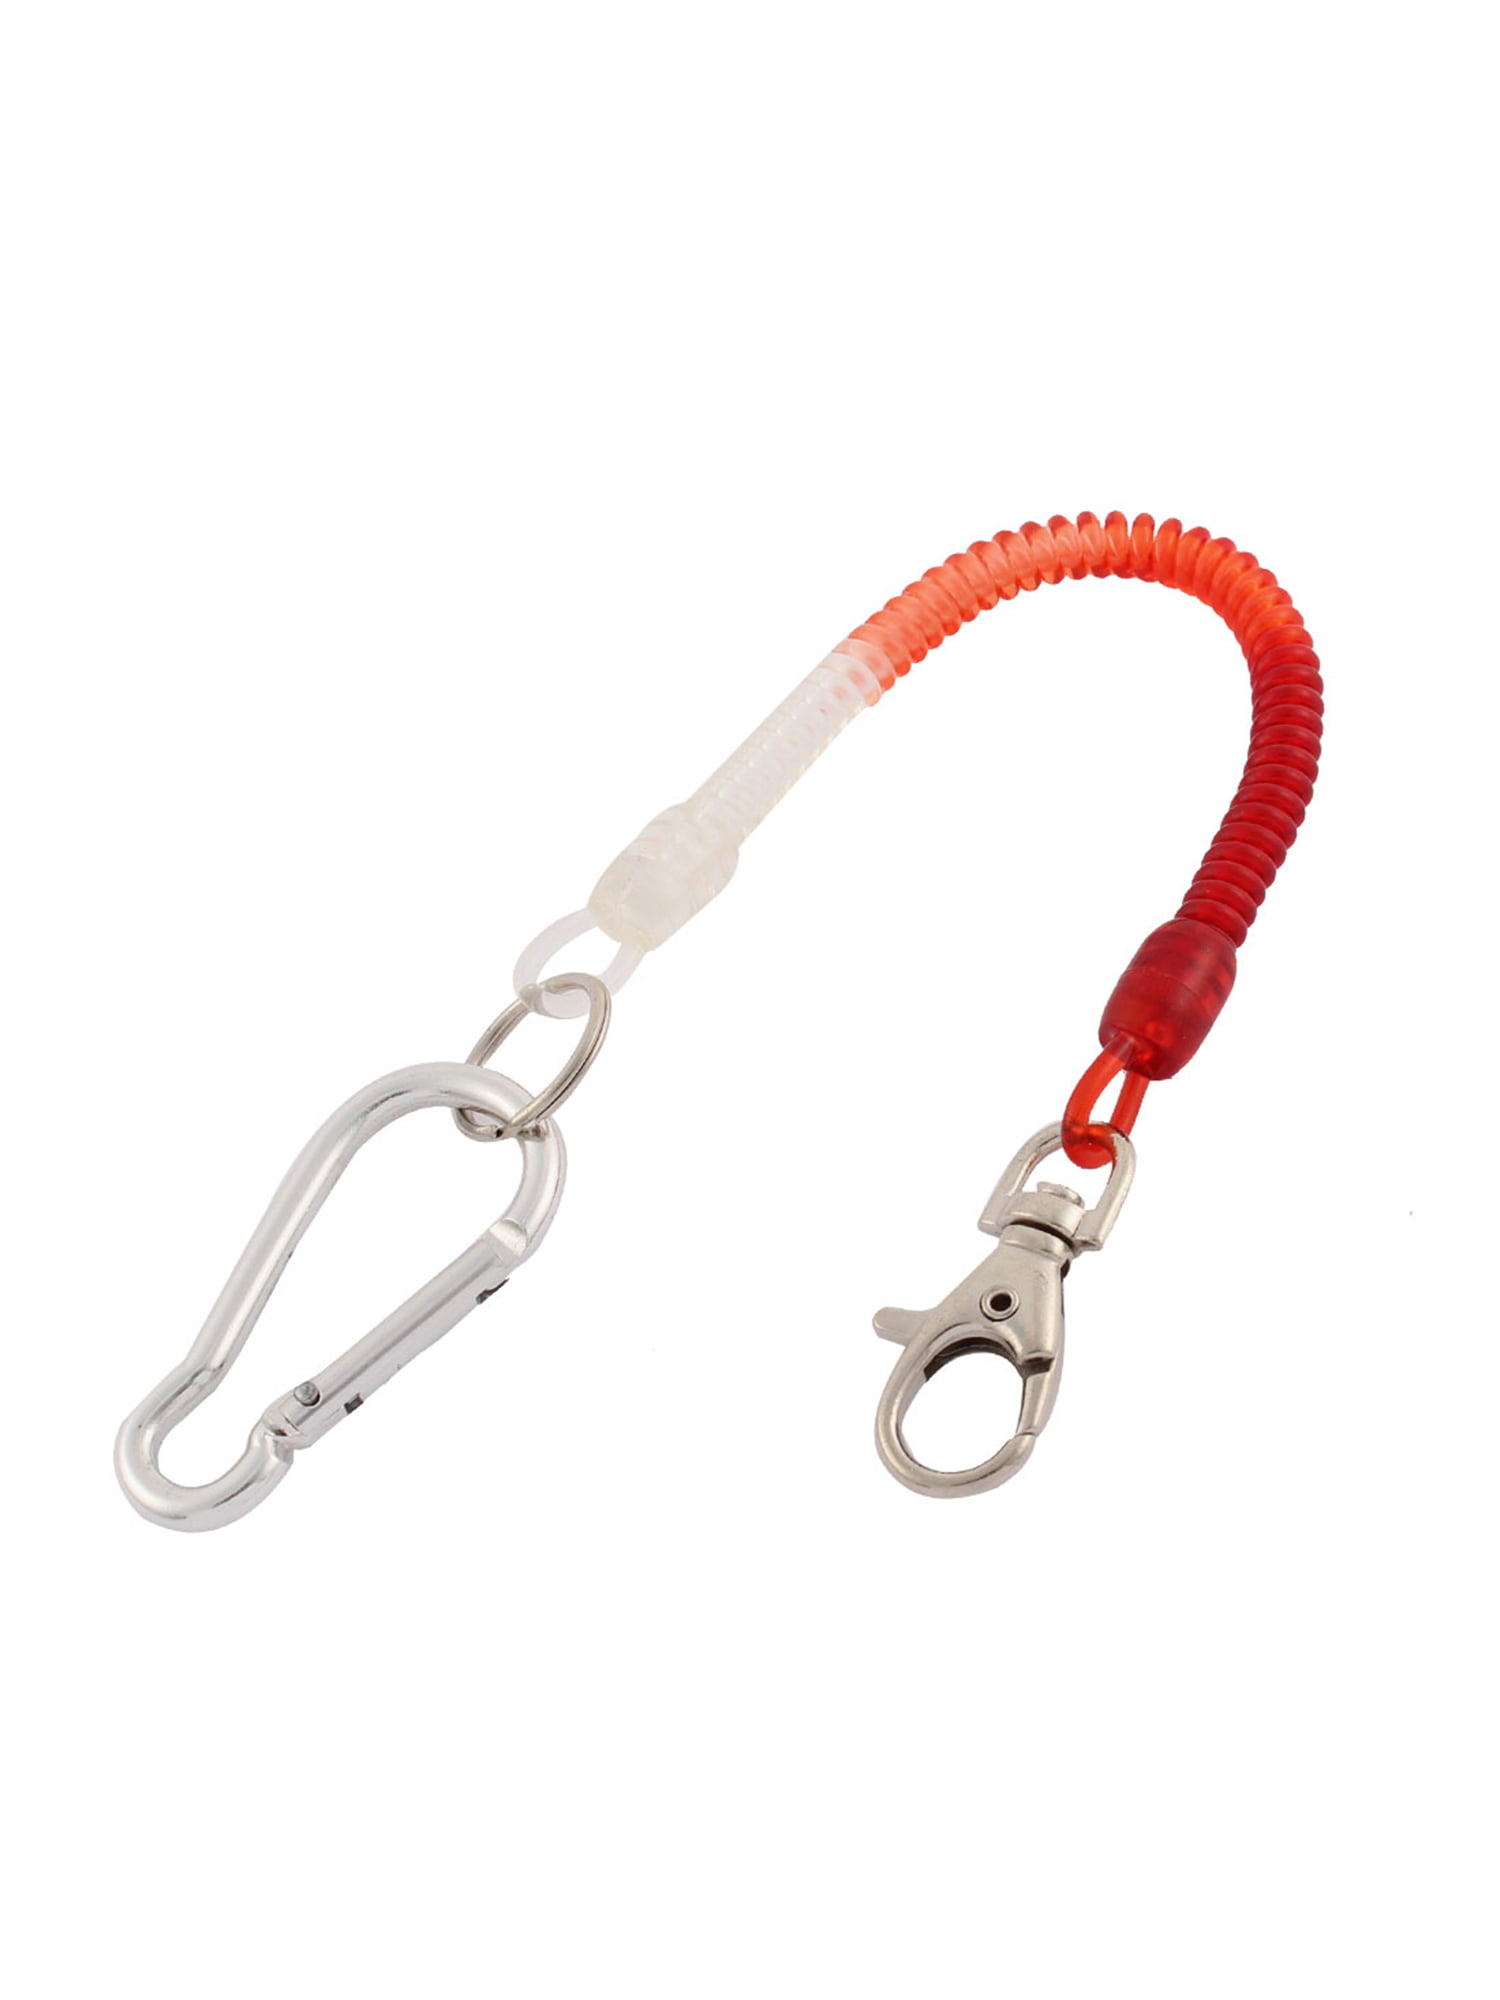 Metal Carabiner Hook Spring Stretchy Coil Key Chain Cord w Lobster Clasp 